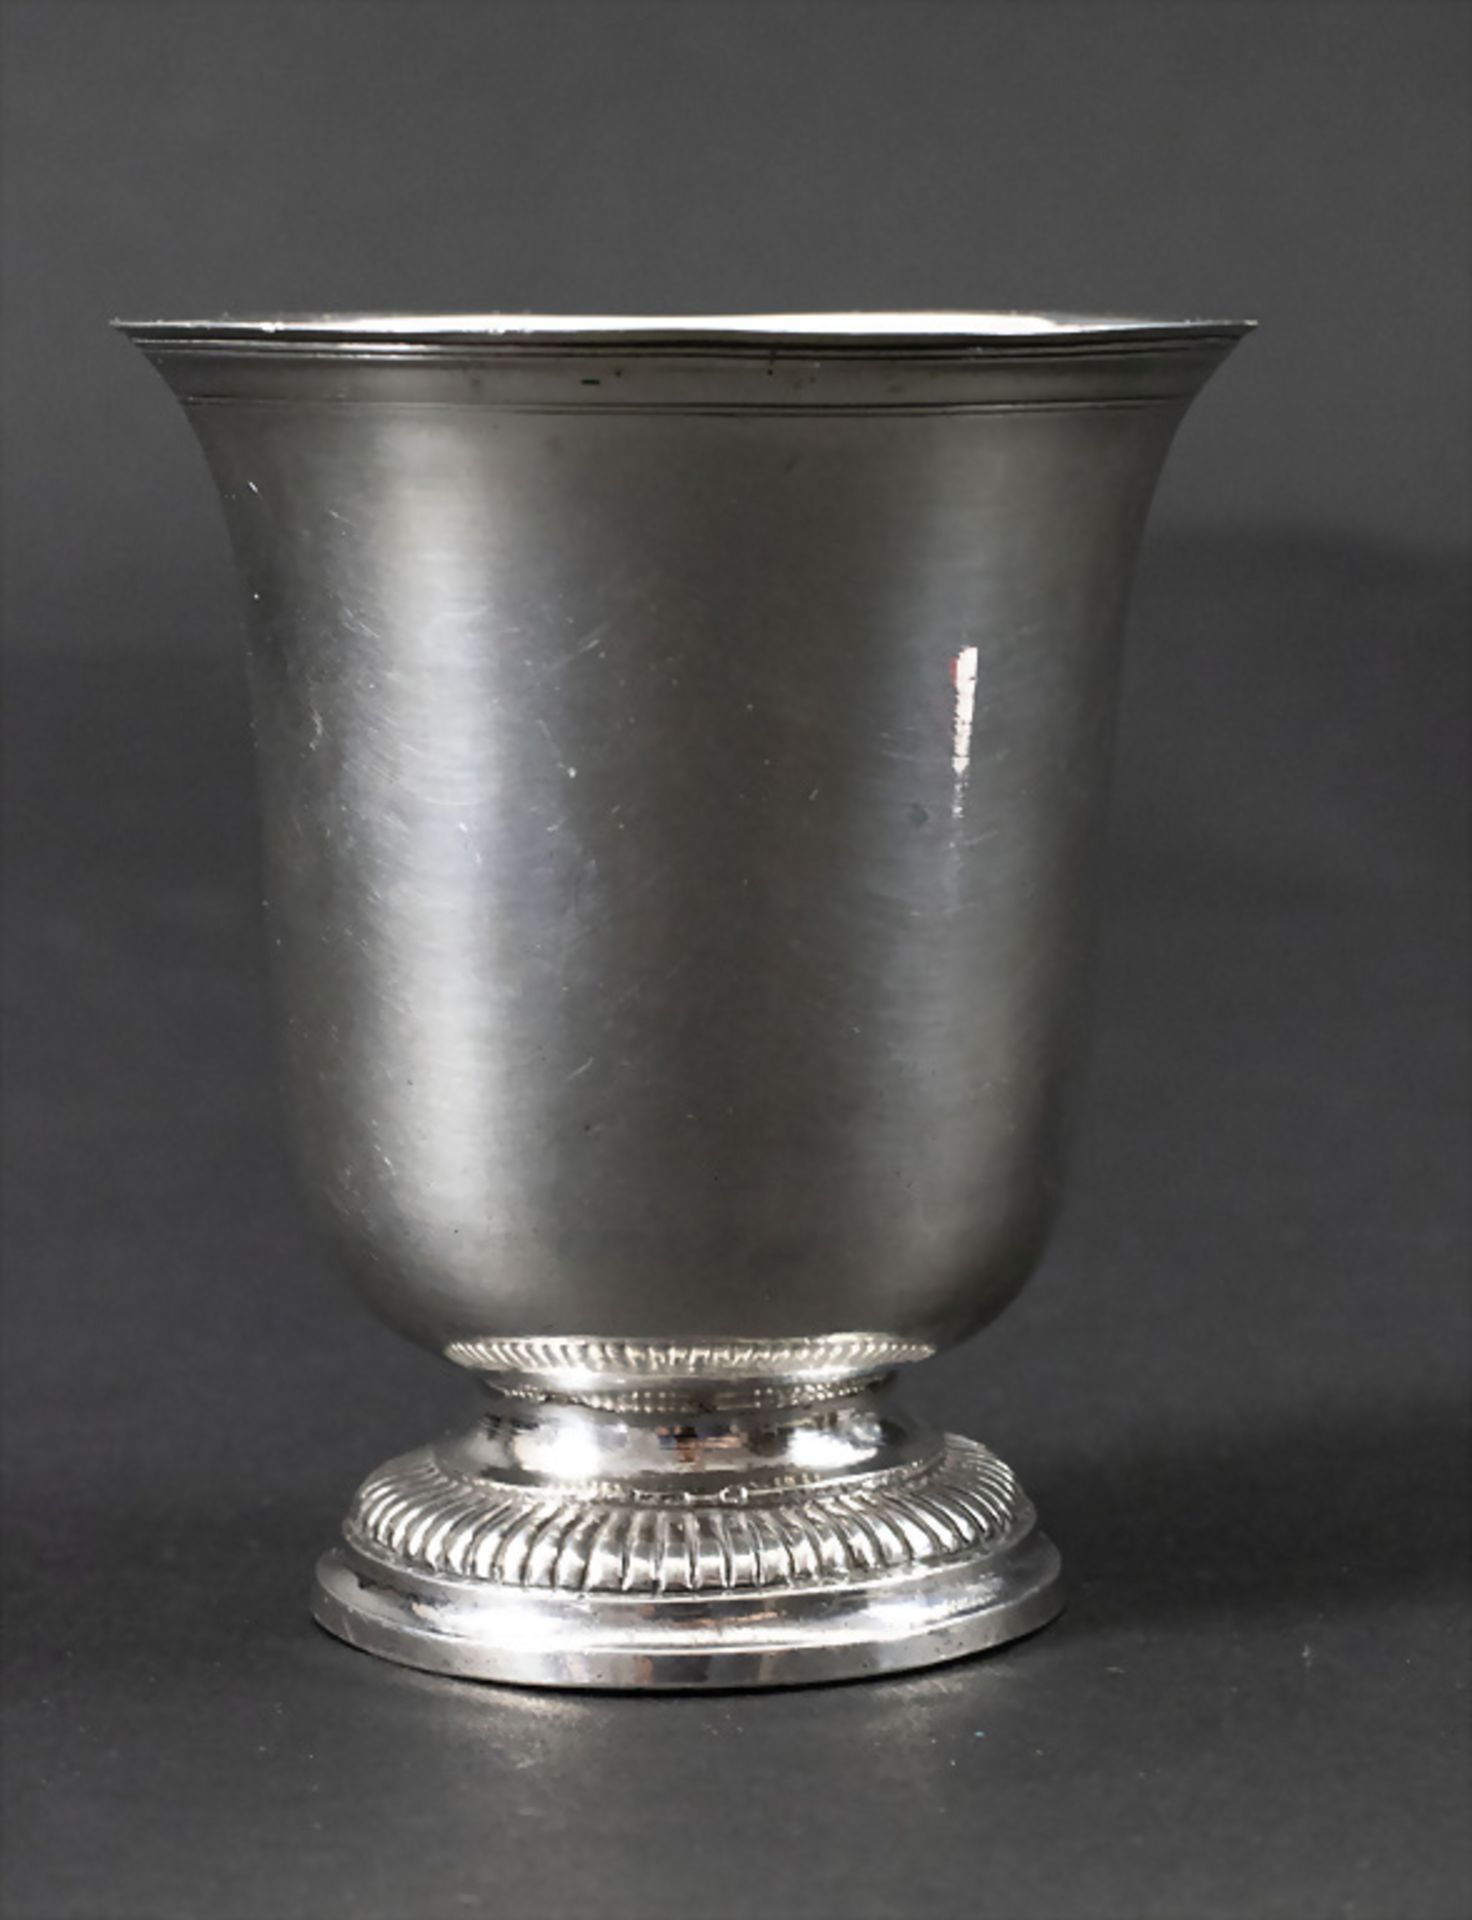 Glockenbecher / A bell shaped silver beaker, Jacques Hanappier, Orleans, 1752-1754 - Image 2 of 5